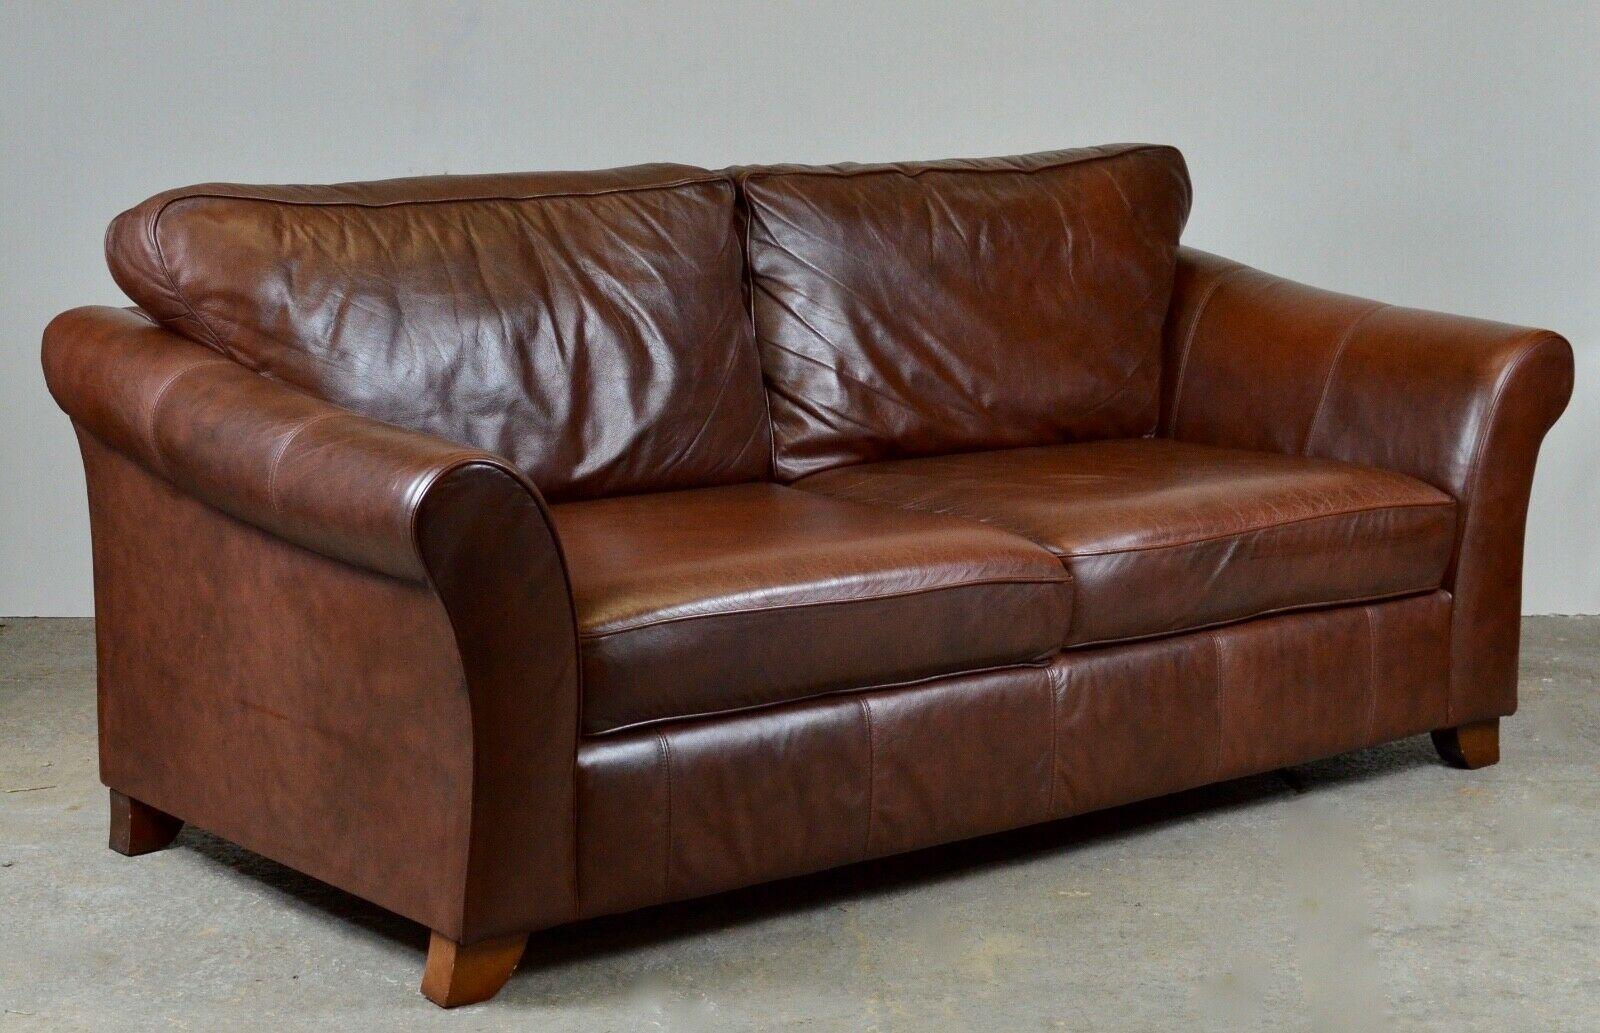 We are delighted to offer for sale this beautiful Marks & Spencers Abbey large 3-seater brown leather sofa. It features a smooth high back and seat cushions which provide ultimate comfort. It will have normal patina throughout and is in good